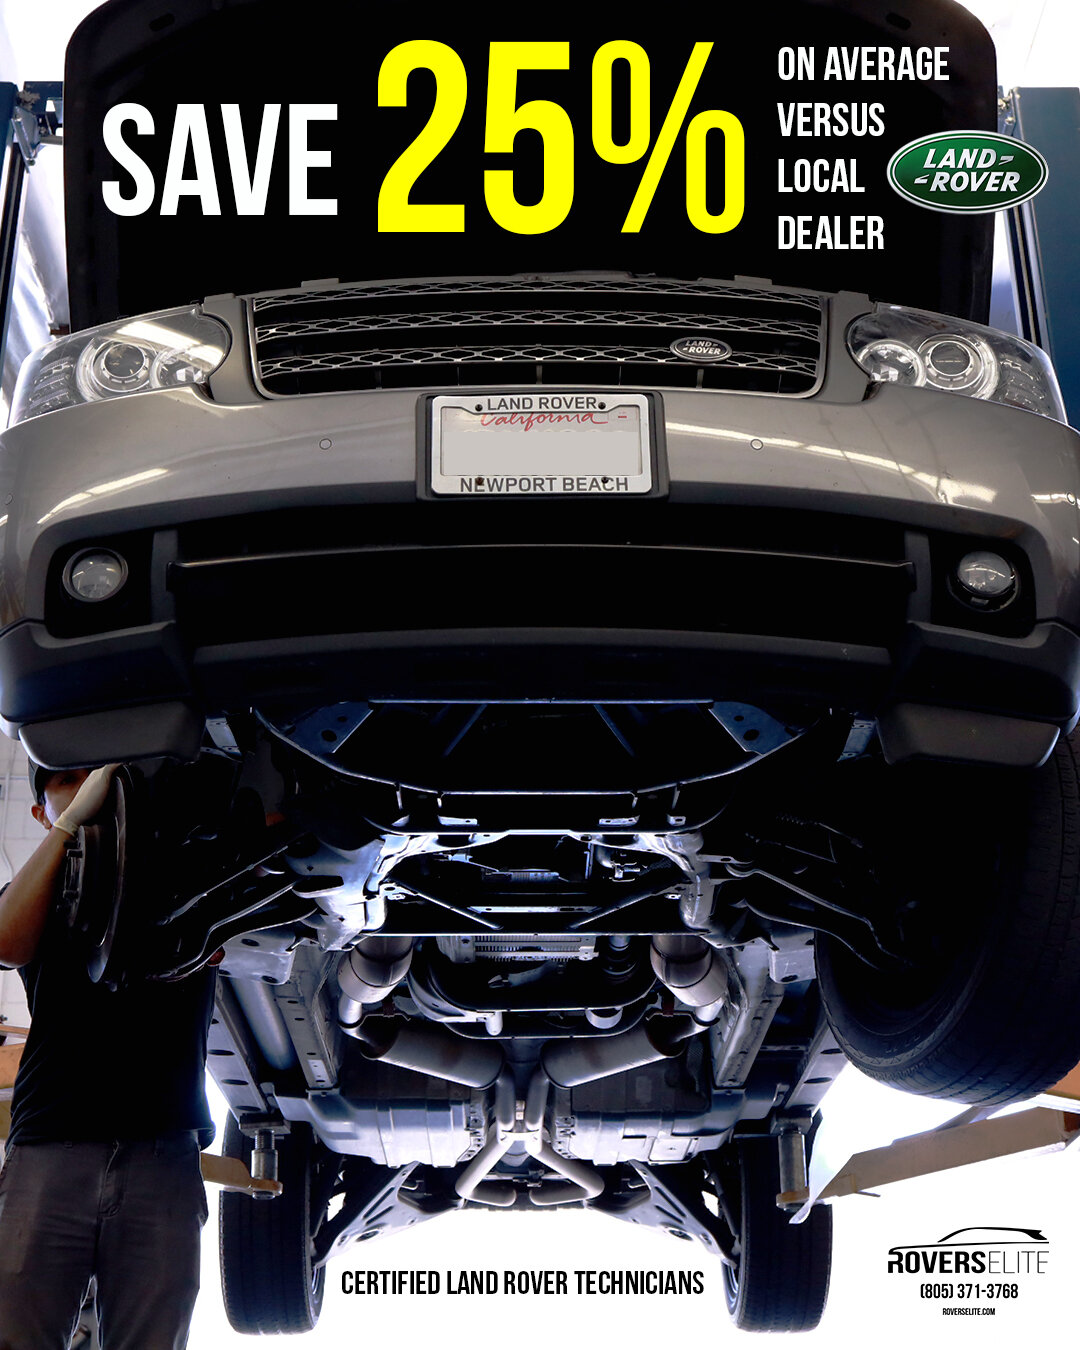 SAME SERVICE, BETTER PRICE 💲
Save 2️⃣5️⃣% or more on average versus your local dealership on Land Rover Service and Repair

CERTIFIED Land Rover TECHNICIANS 👨&zwj;🔧🧑&zwj;🔧👩&zwj;🔧🚙
Services rendered at Rovers Elite WILL NOT void 🛑factory warr